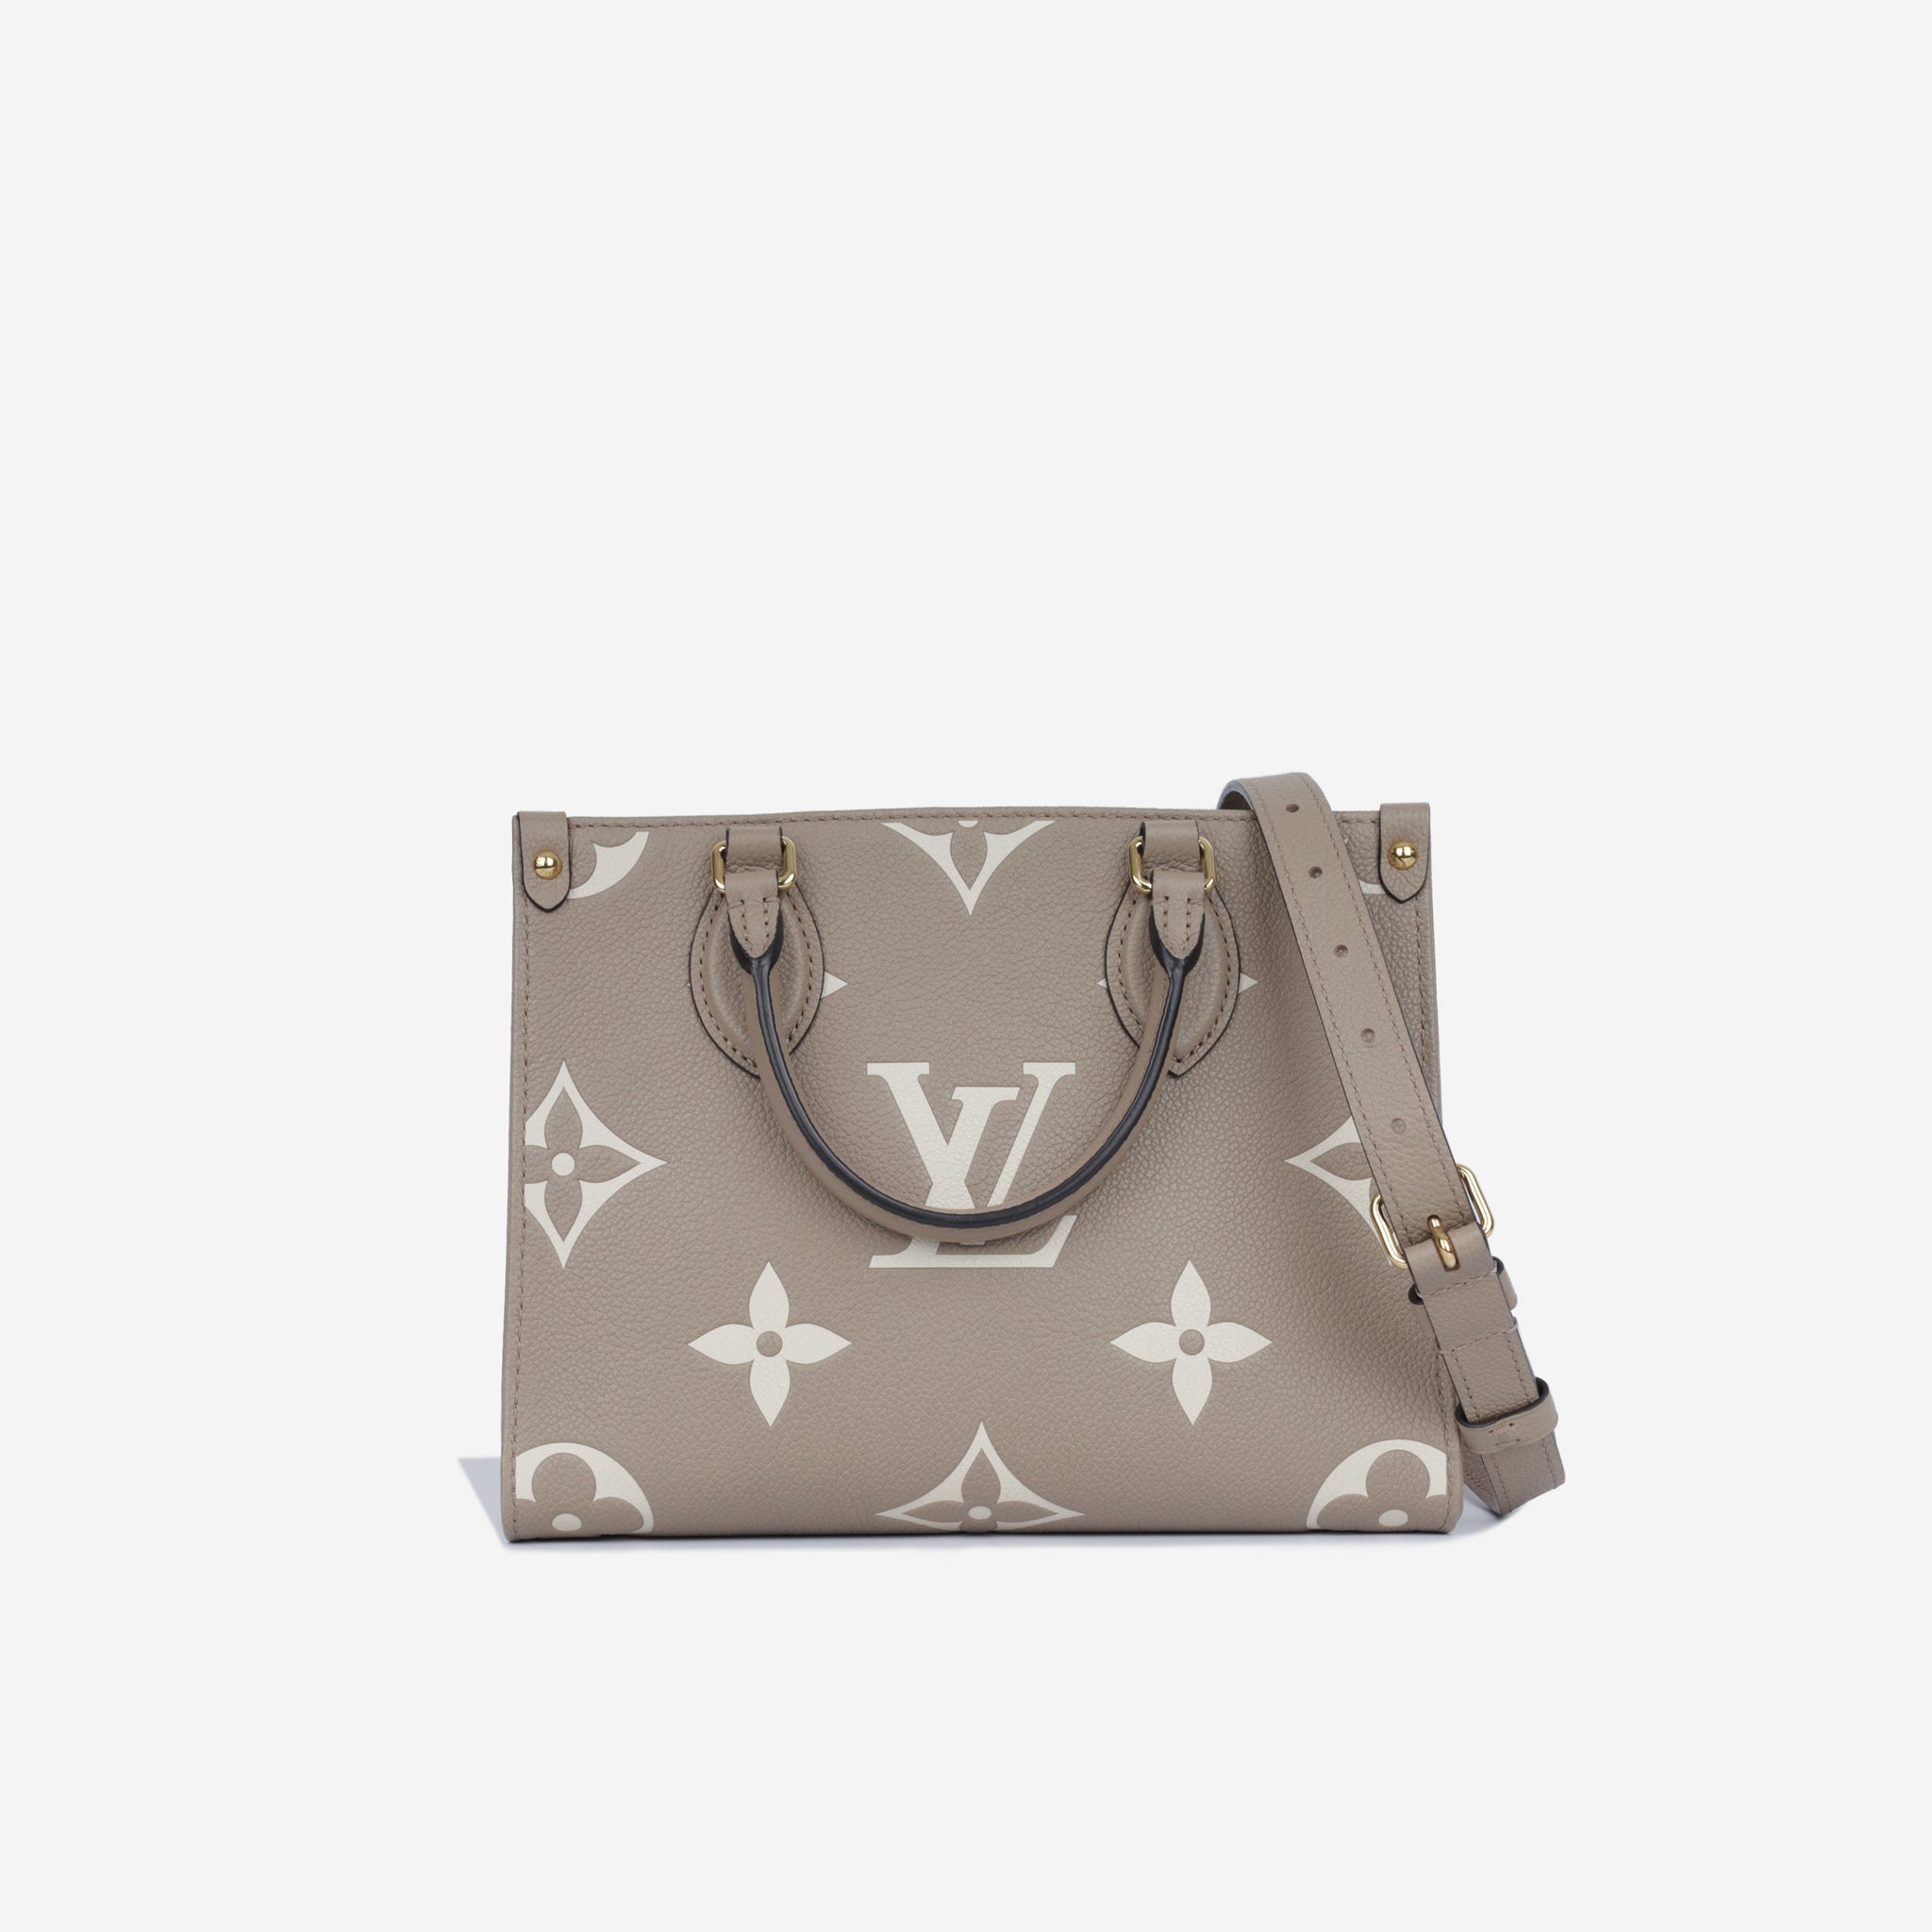 Lv On The Go Pm Reviewed